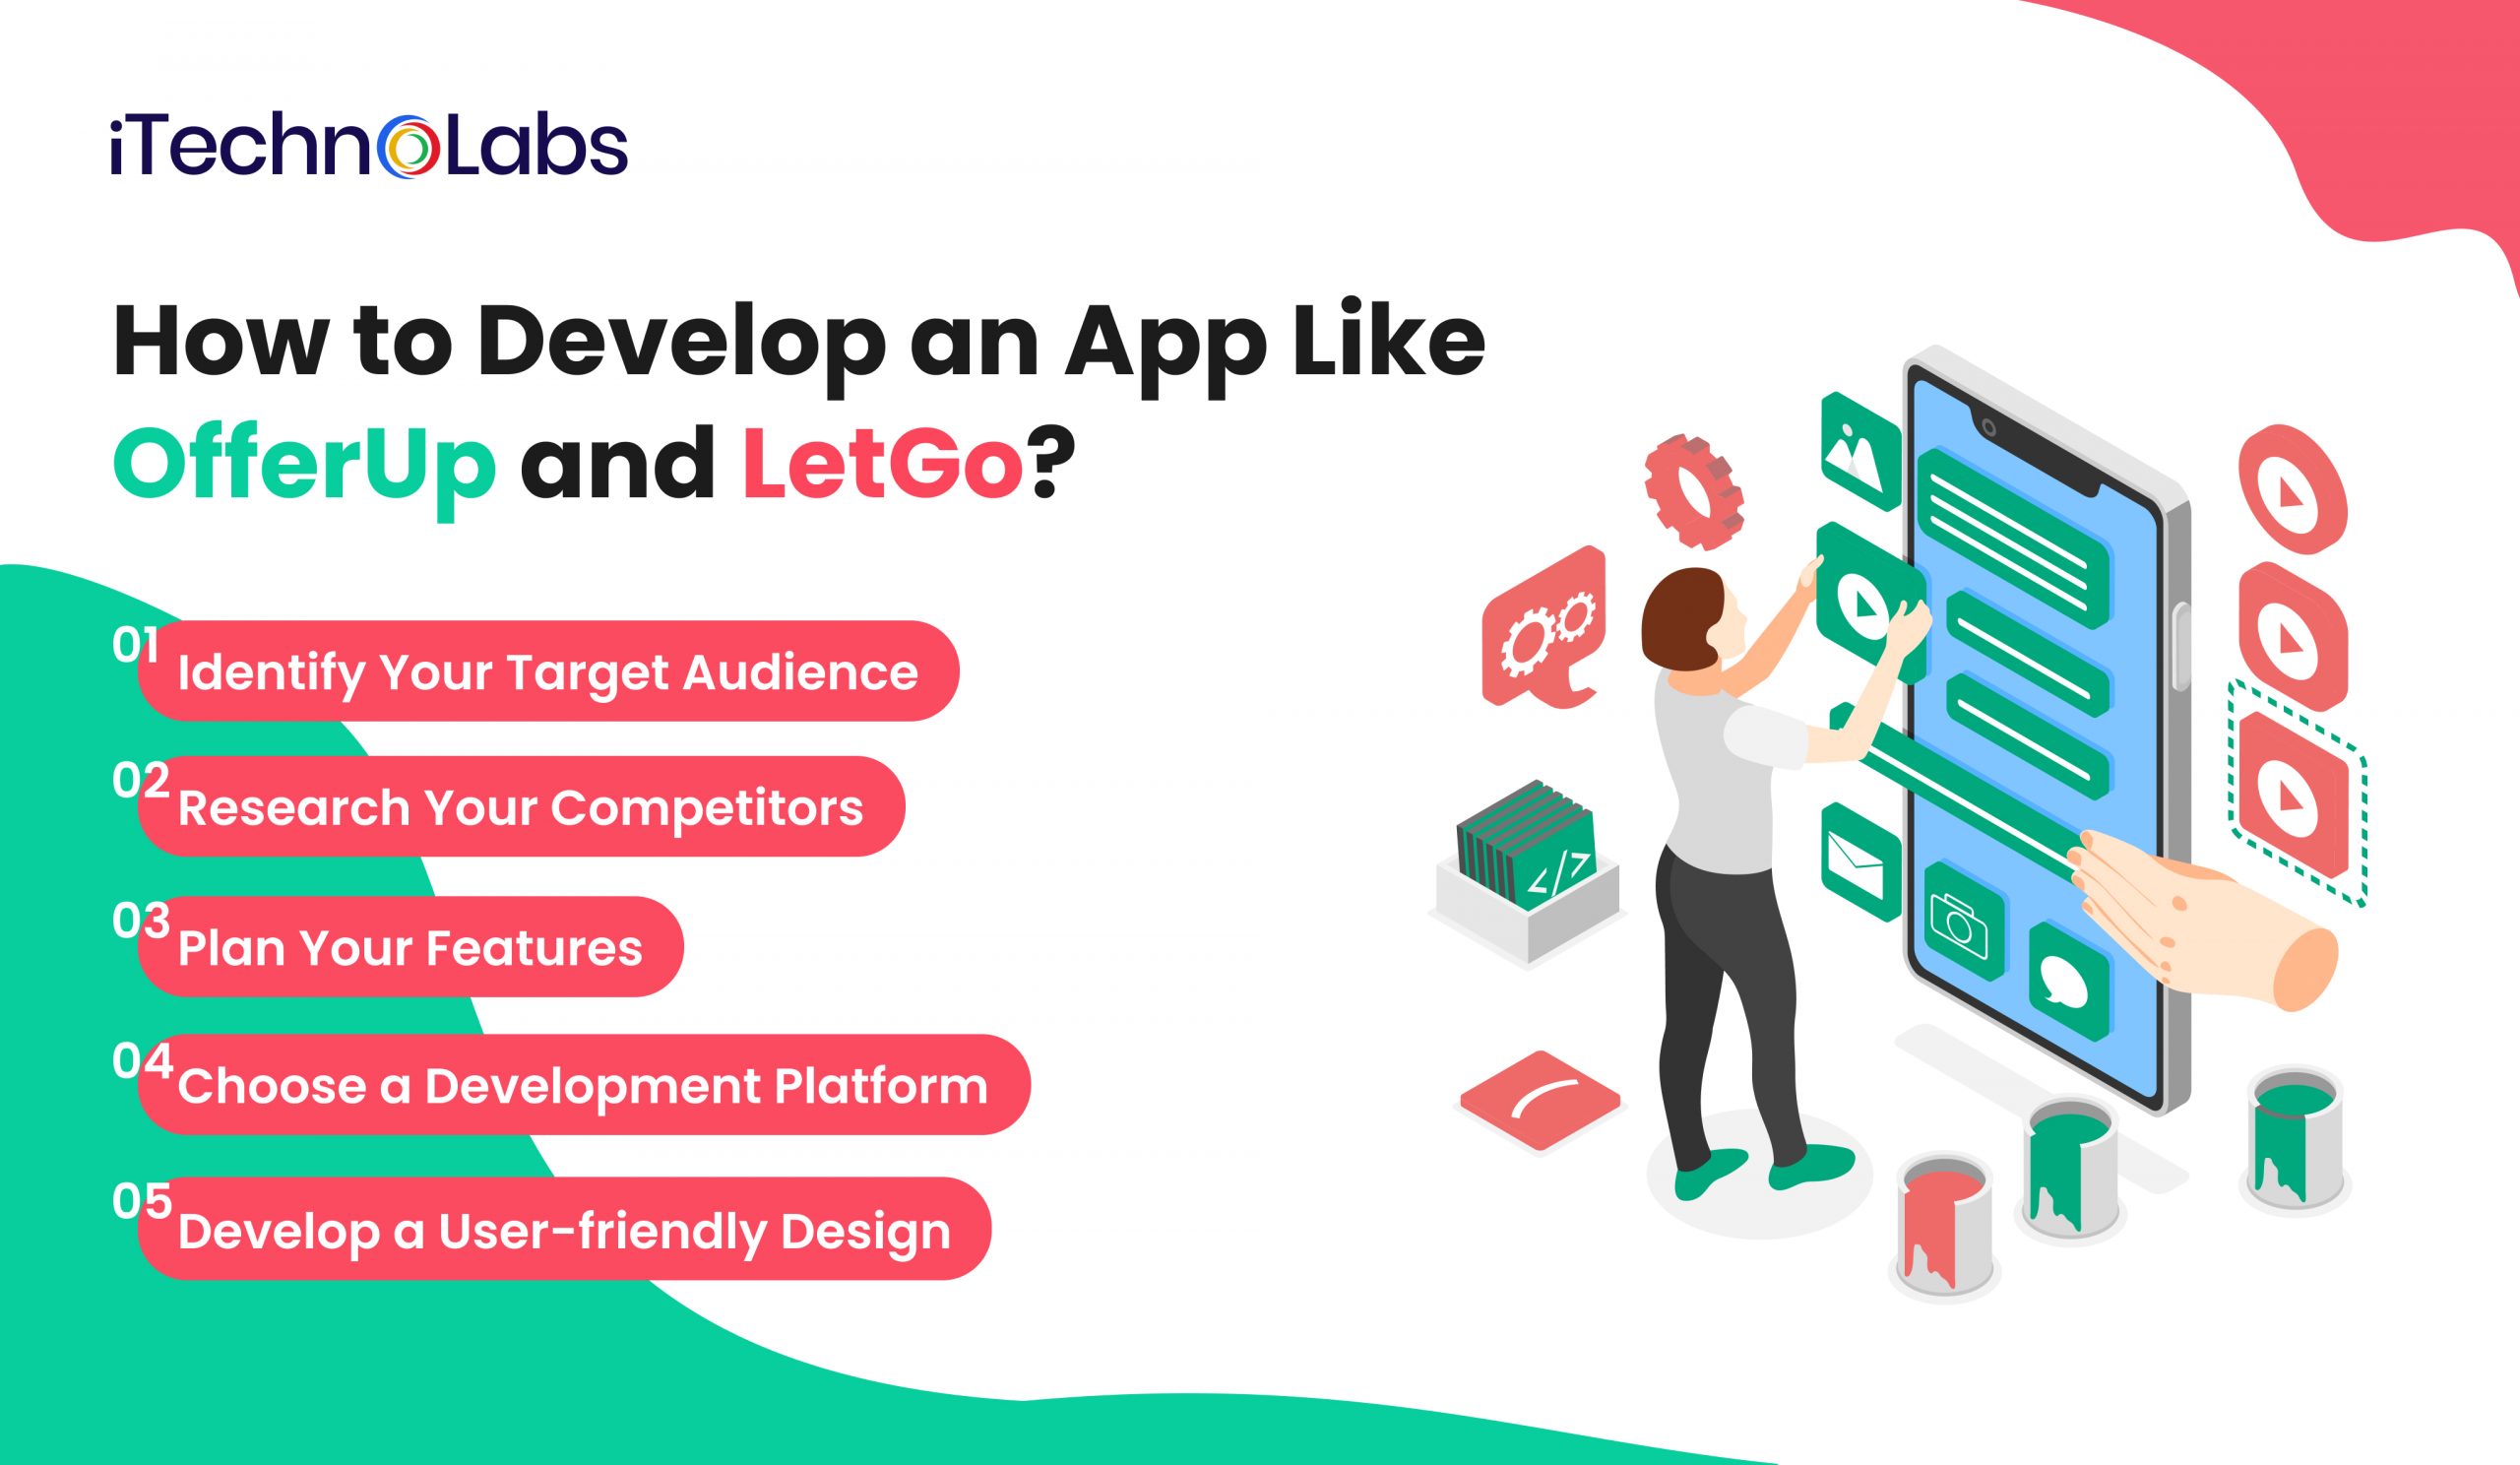 iTechnolabs-How to Develop an App Like OfferUp and LetGo?